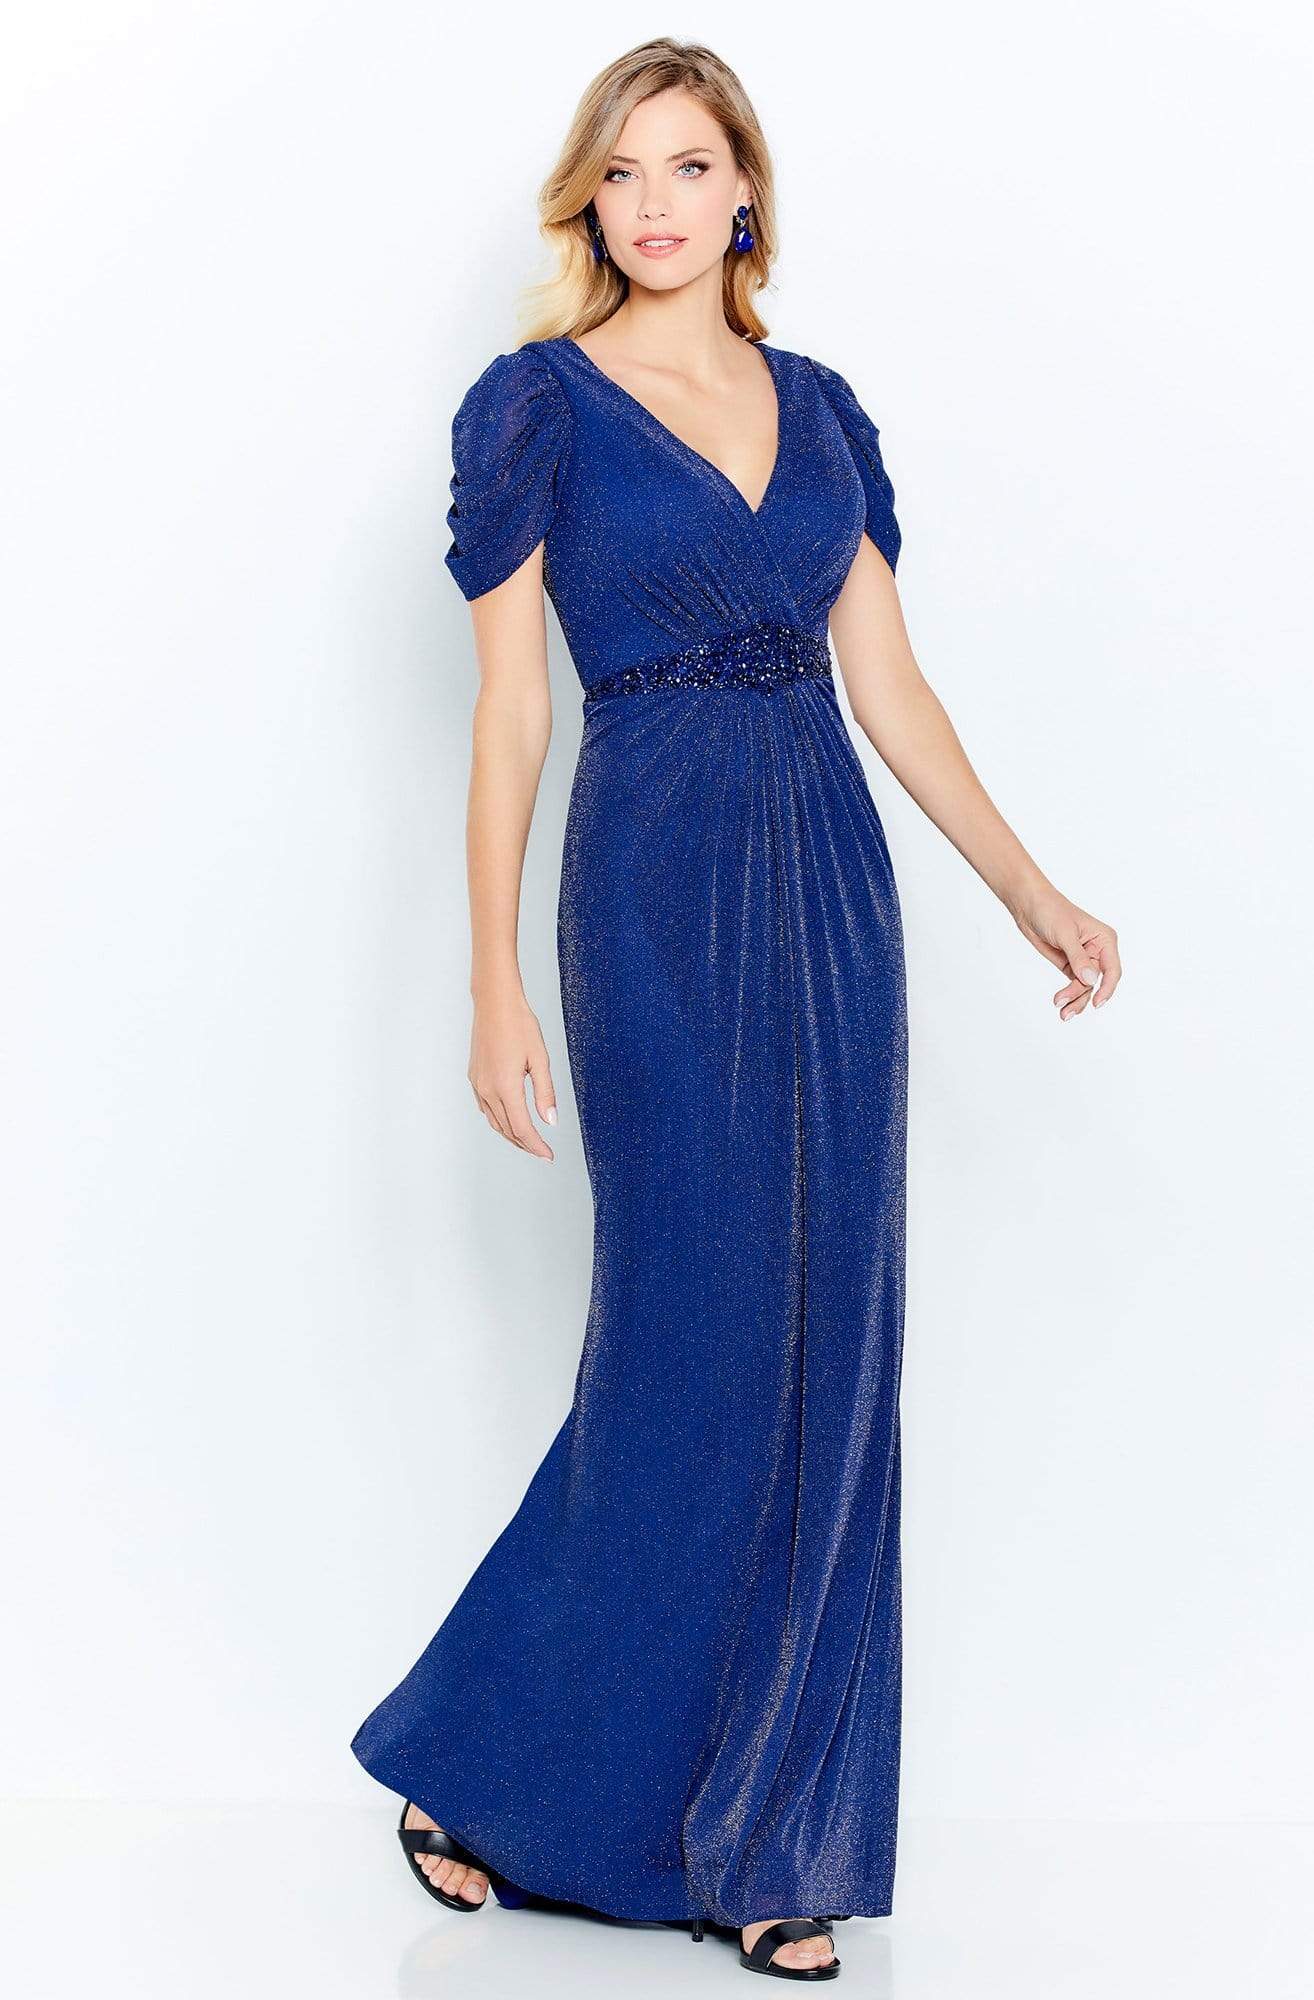 Cameron Blake by Mon Cheri - 120615W Ruched Short Sleeves Sheath Dress Mother of the Bride Dresses 16W / Navy/Gold